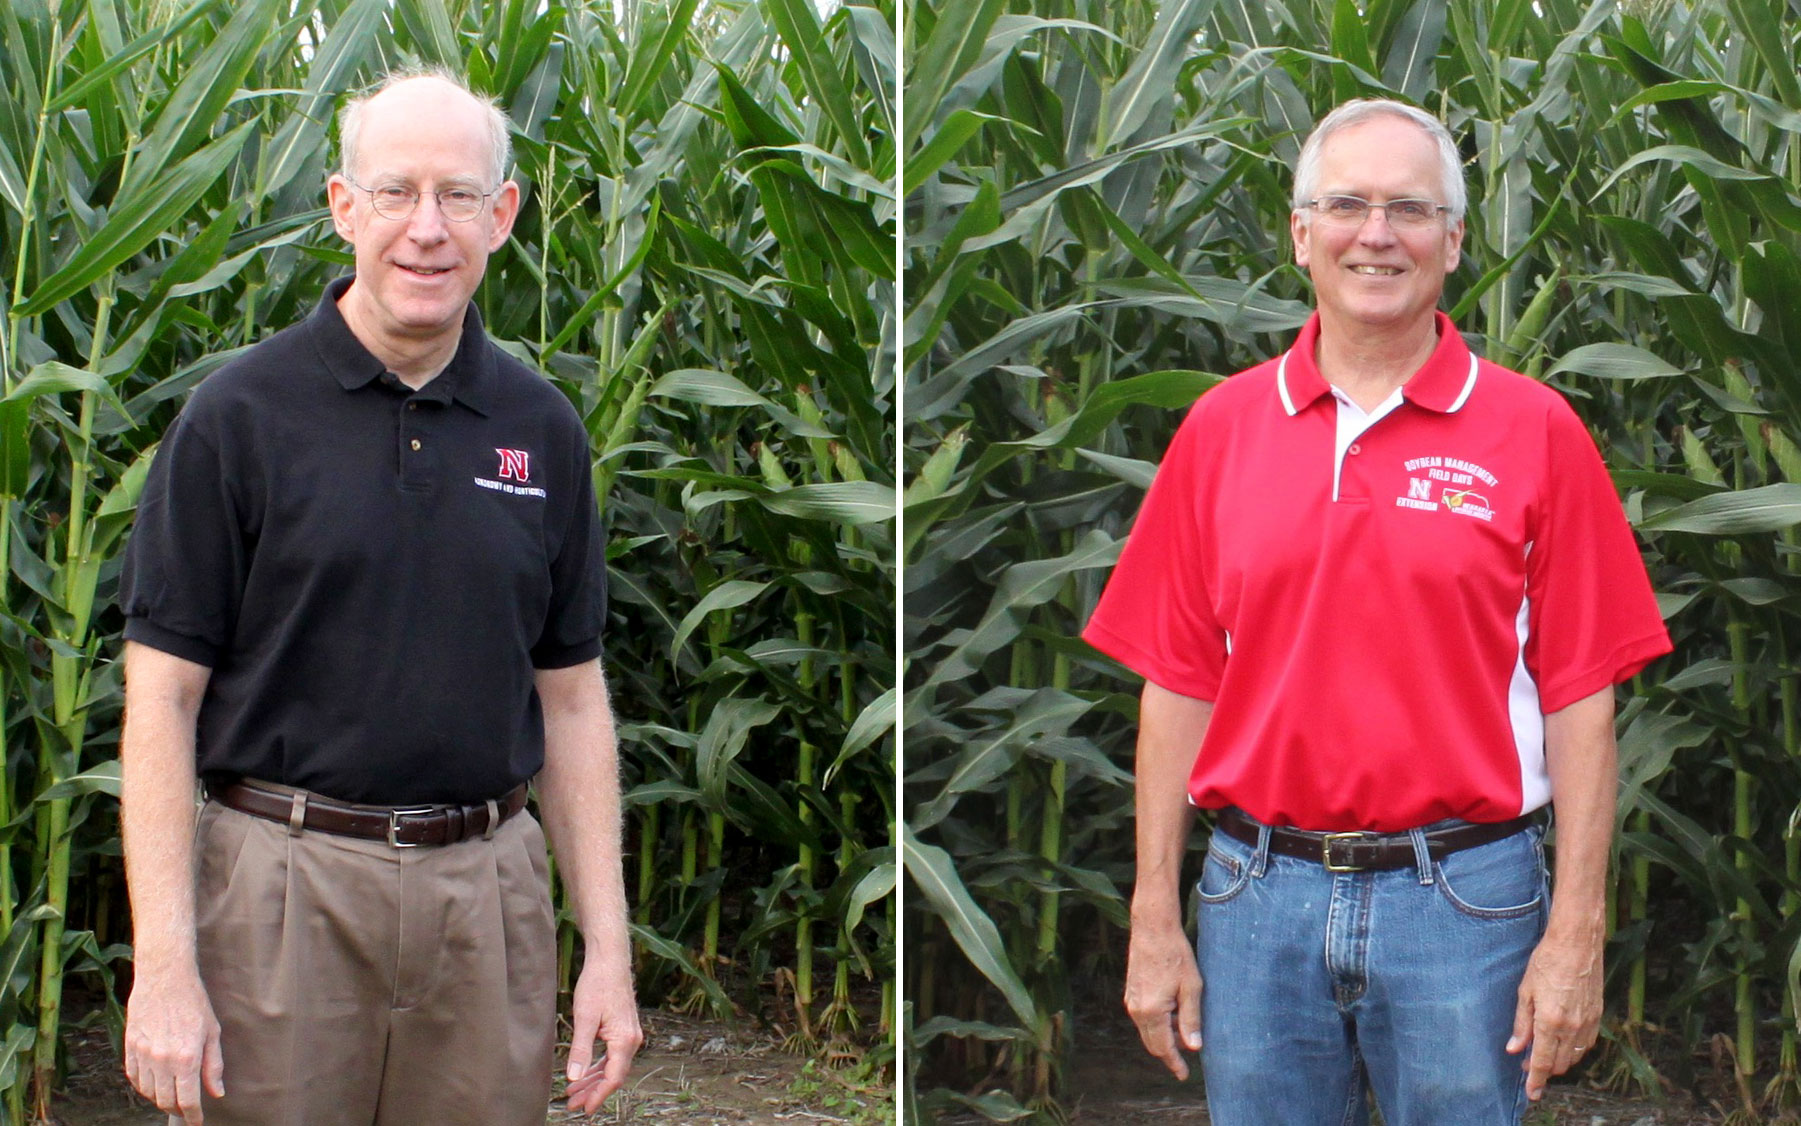 Richard Ferguson, left, and Roger Elmore were recognized for their dedication and outstanding service to the University of Nebraska–Lincoln South Central Agricultural Laboratory.